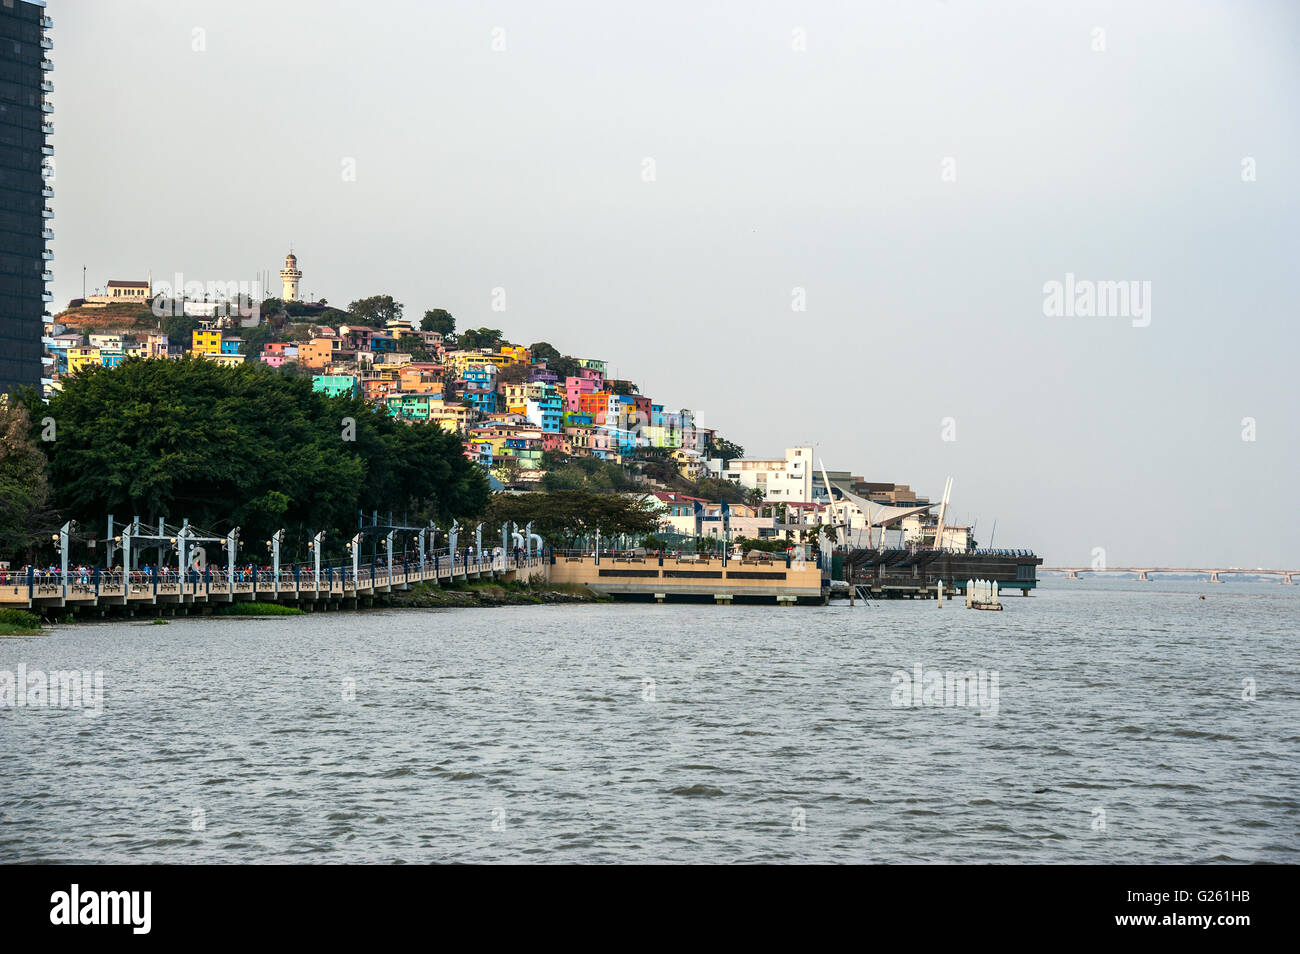 View of Santa Ana hill and the Las Penas neighborhood in Guayaquil, Ecuador with a lighthouse on top Stock Photo